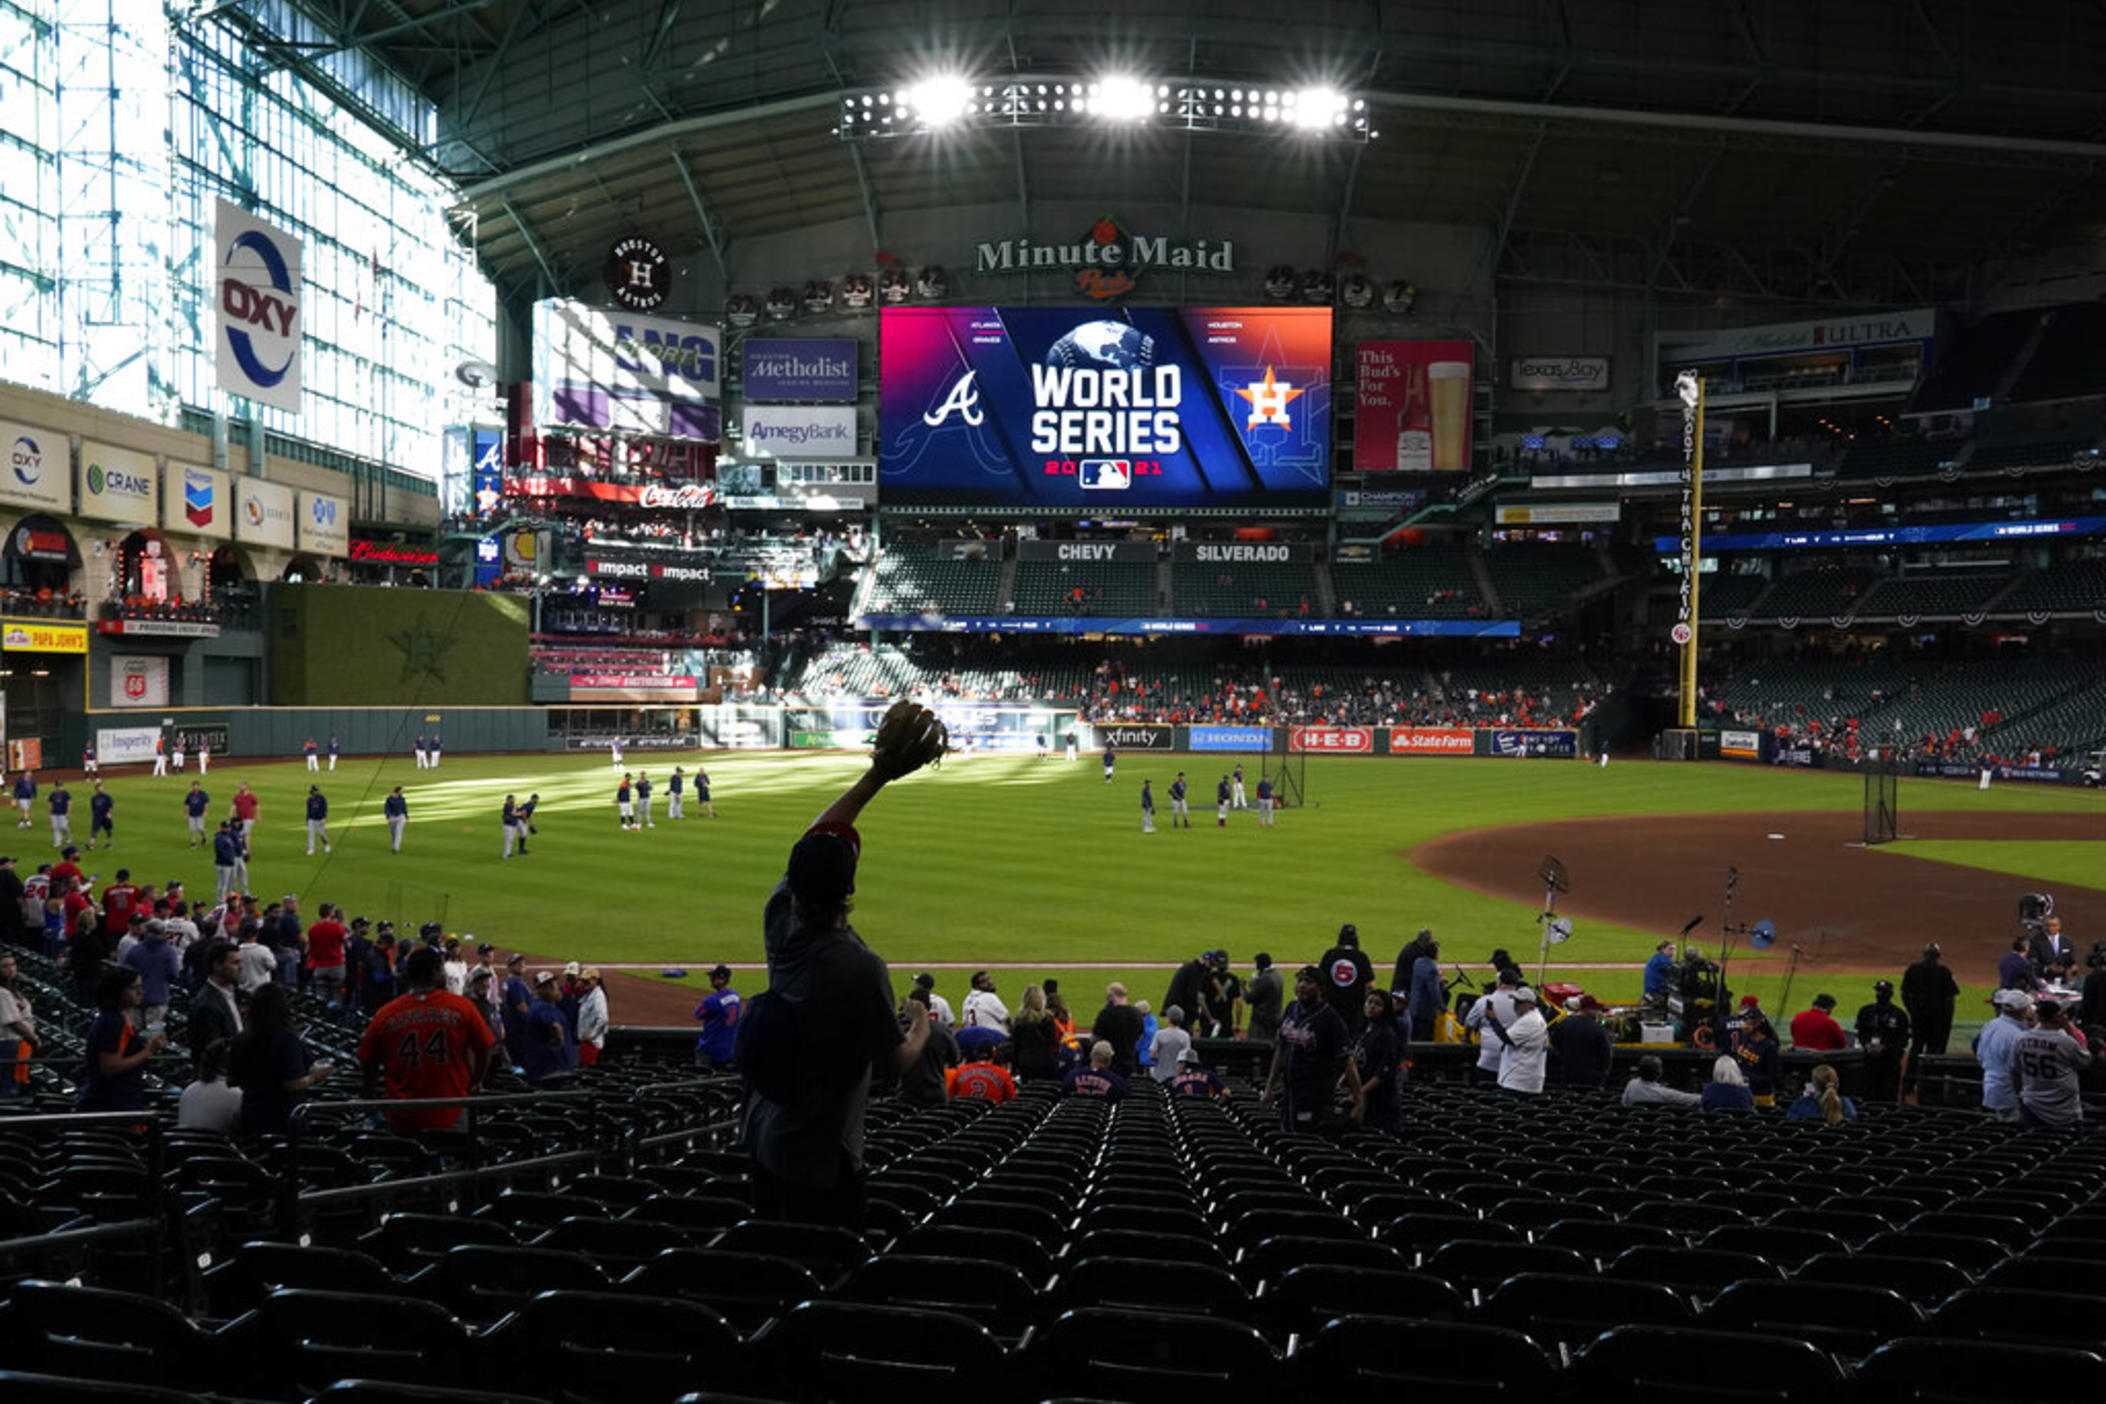 5 things Braves fans should do while in Houston for the World Series